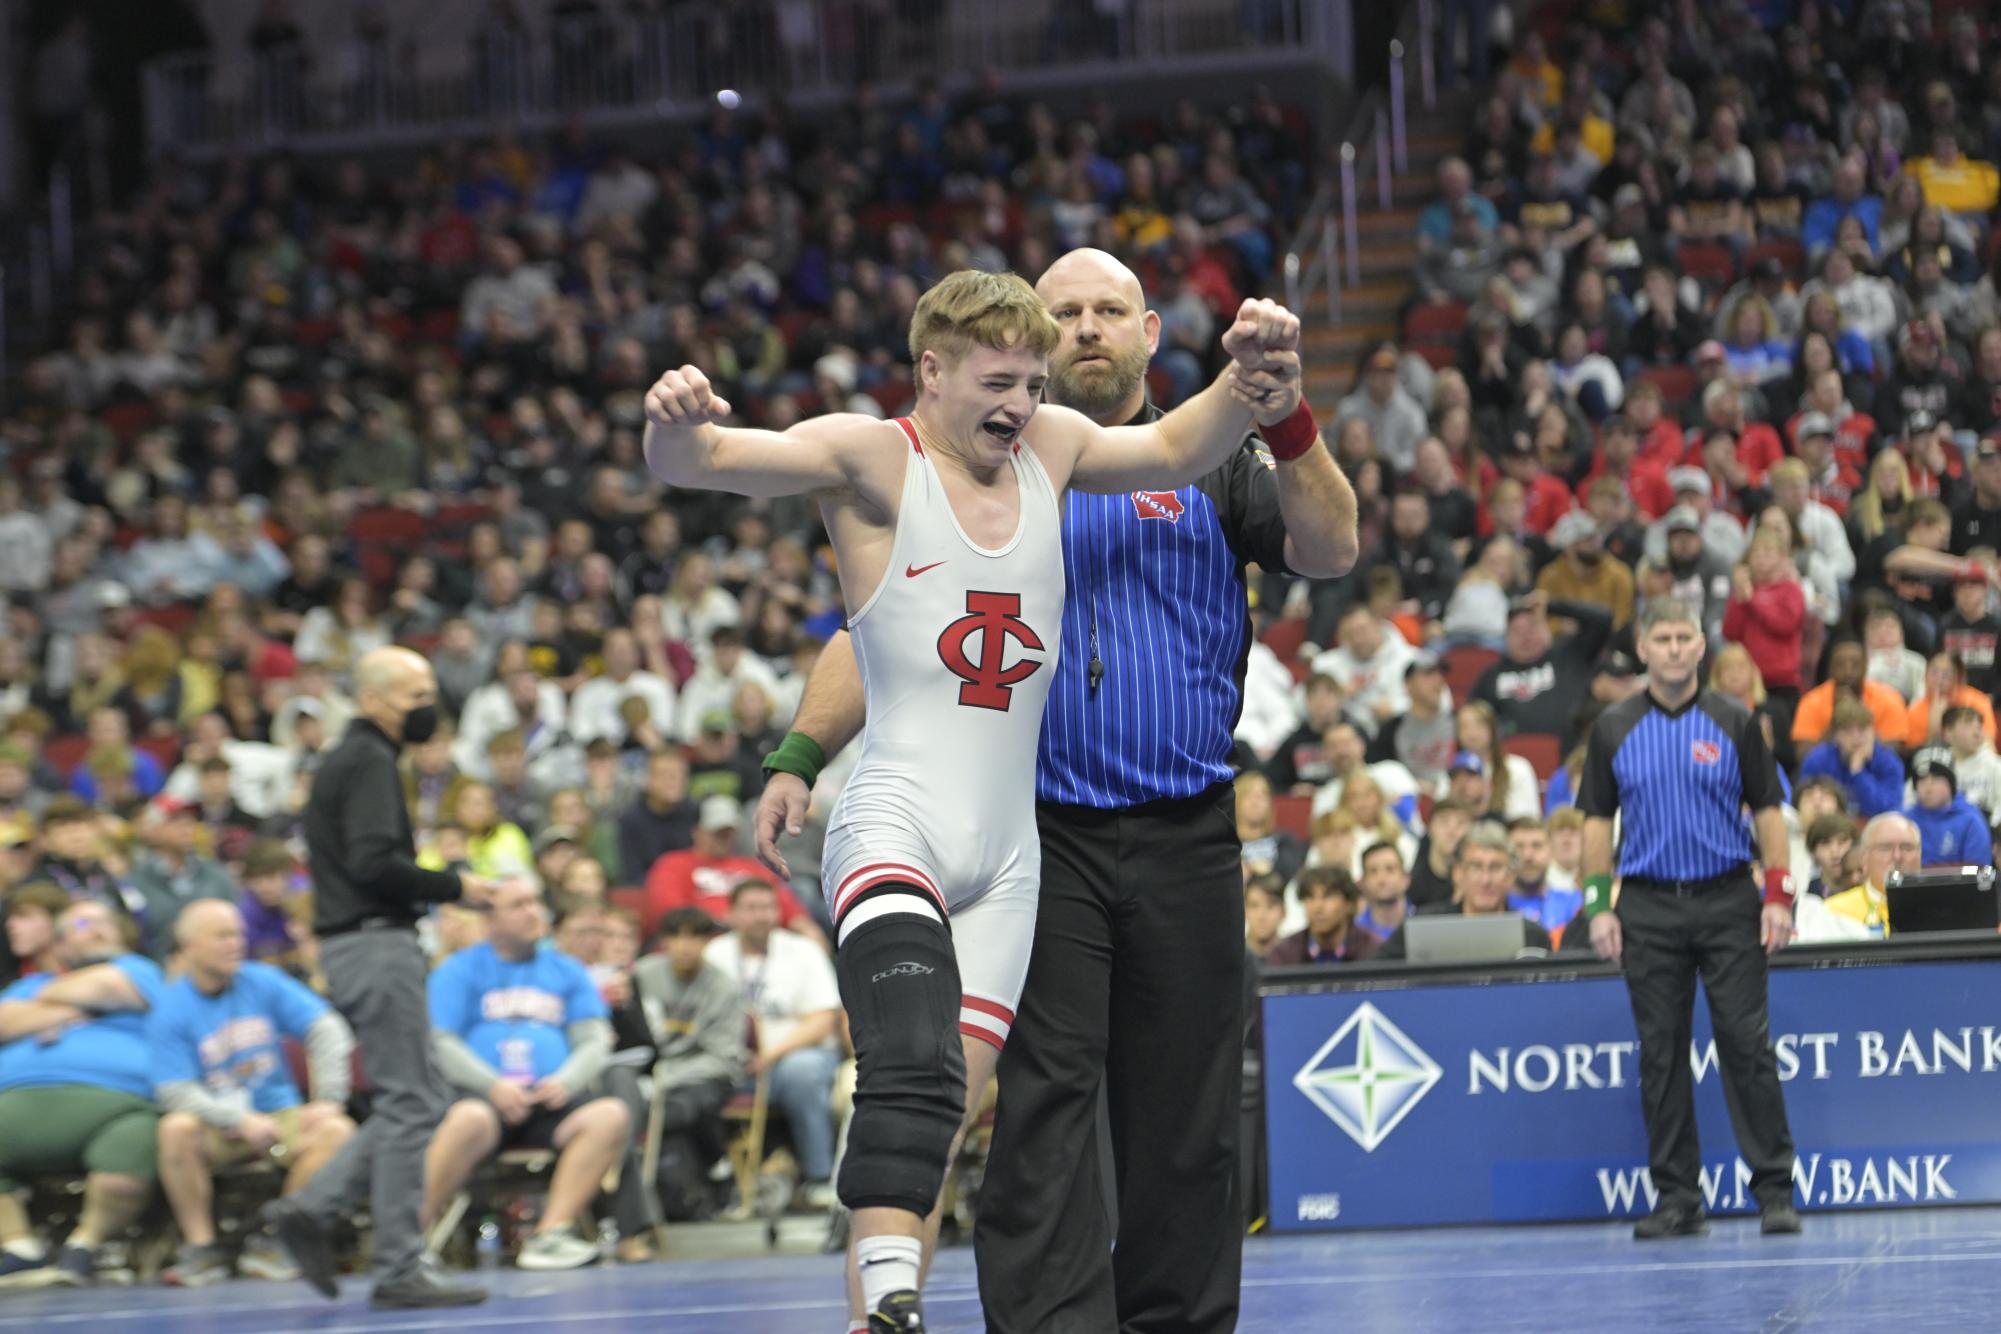 Cale Seaton 24 emotional after winning his second straight state championship.